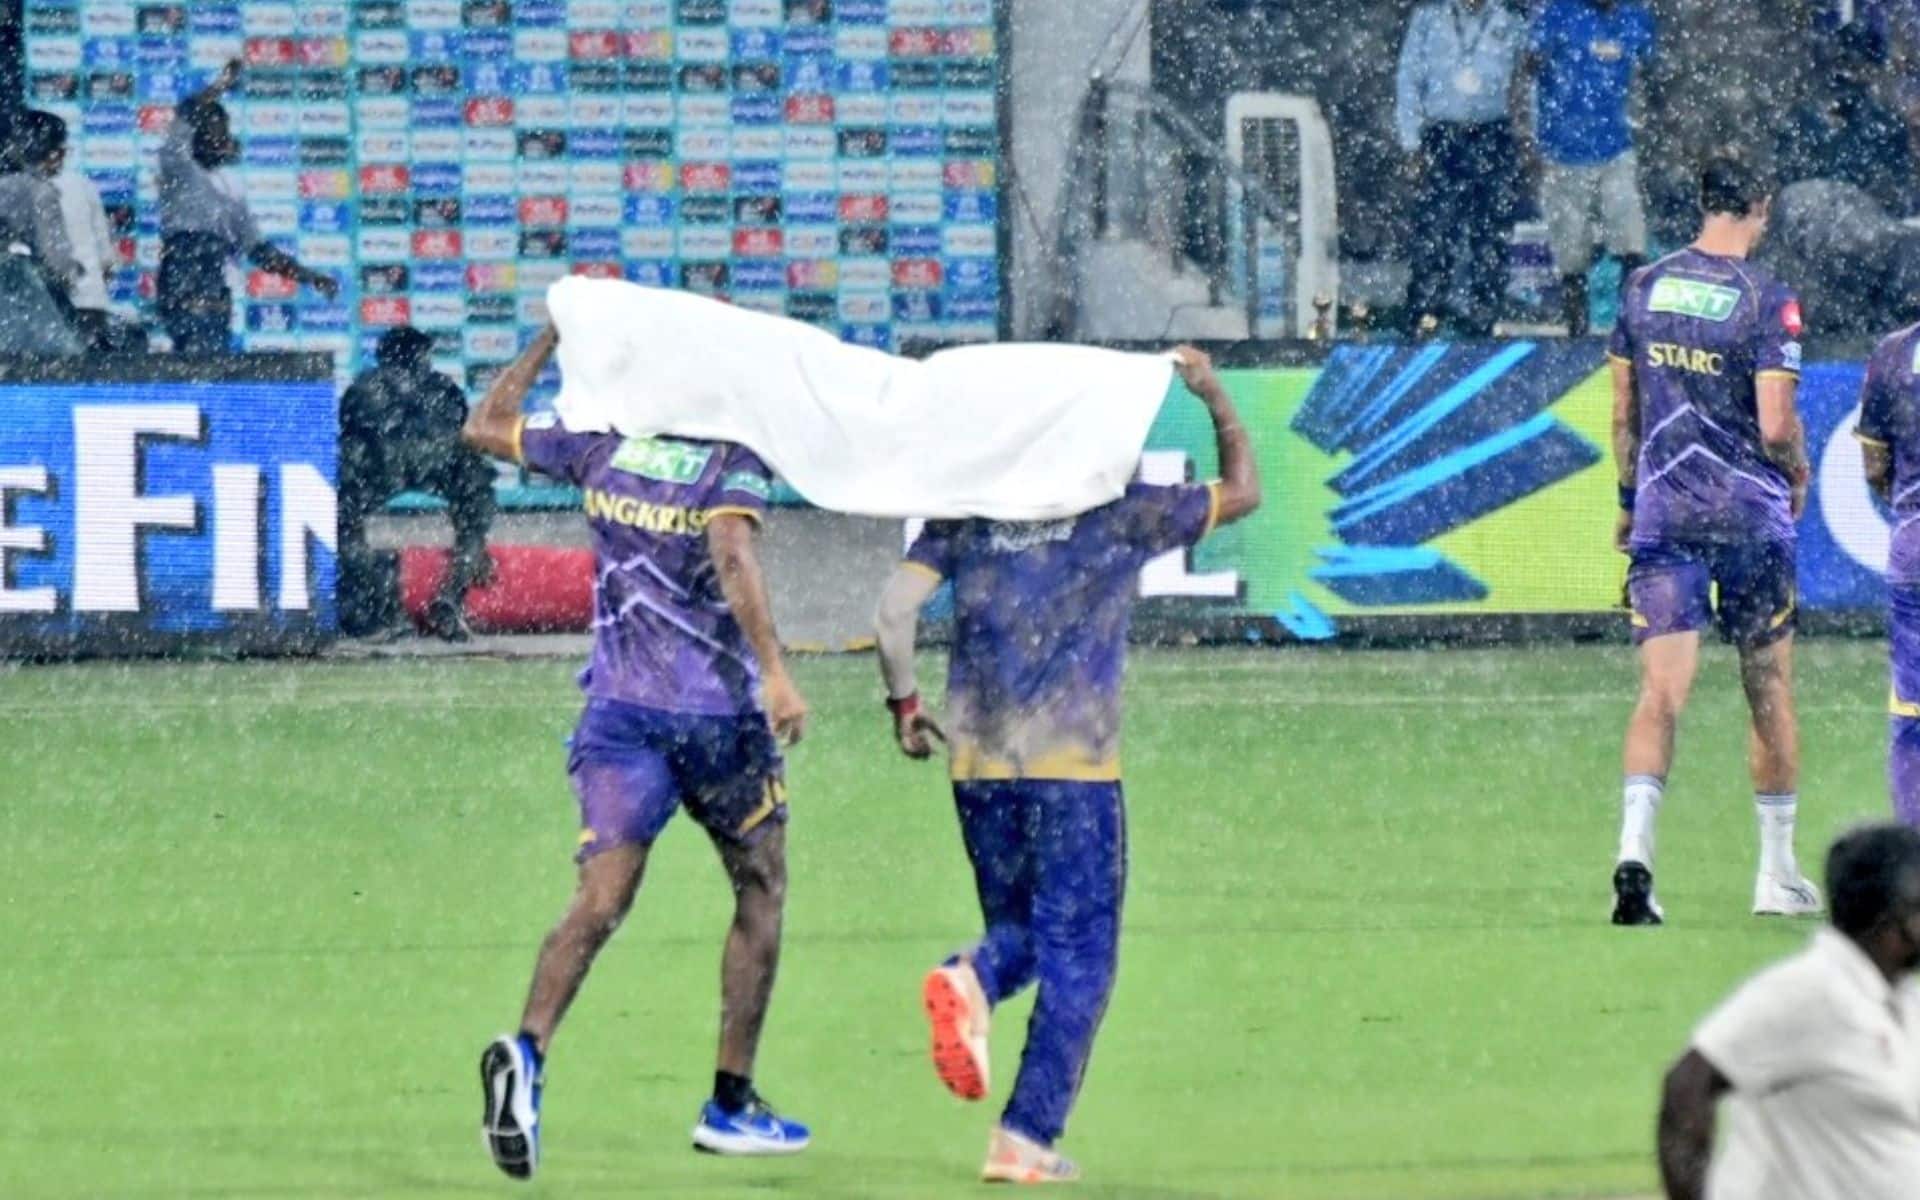 KKR players takes shelter as rains interrupt practice session (X.com)